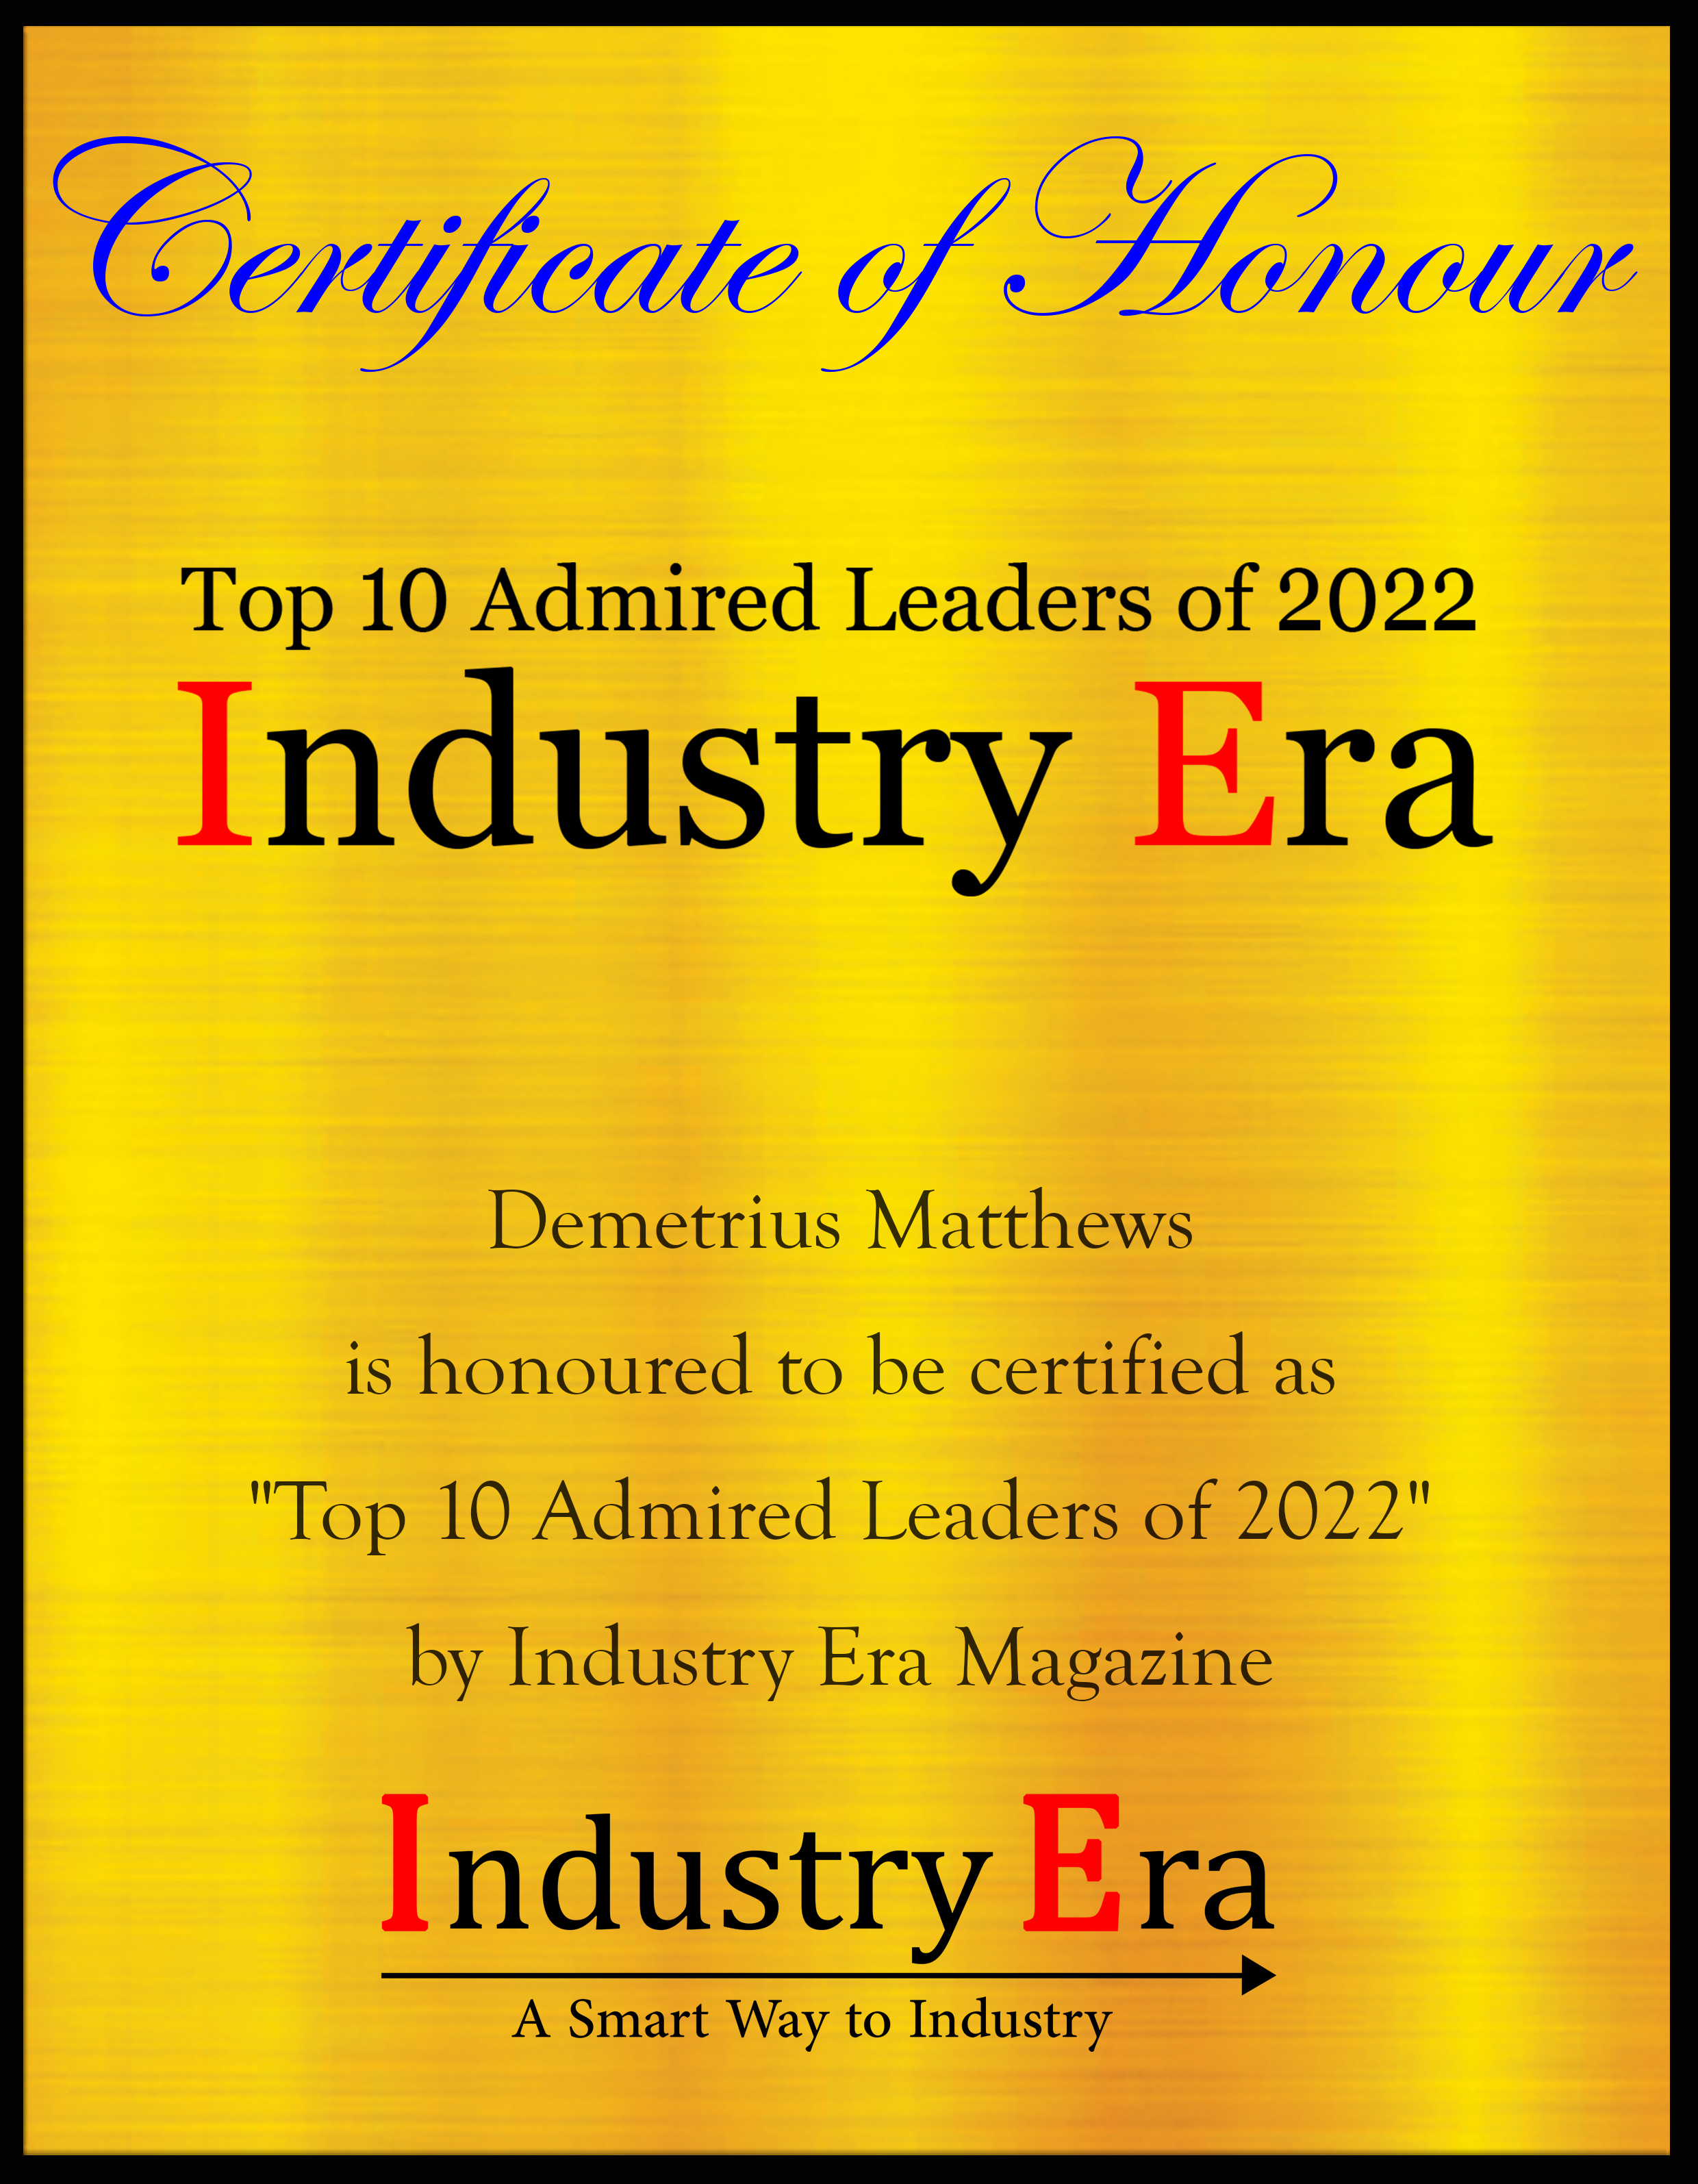 Demetrius Matthews CEO and the founder of Legacy Media LLC, Top 10 Admired Leaders of 2022